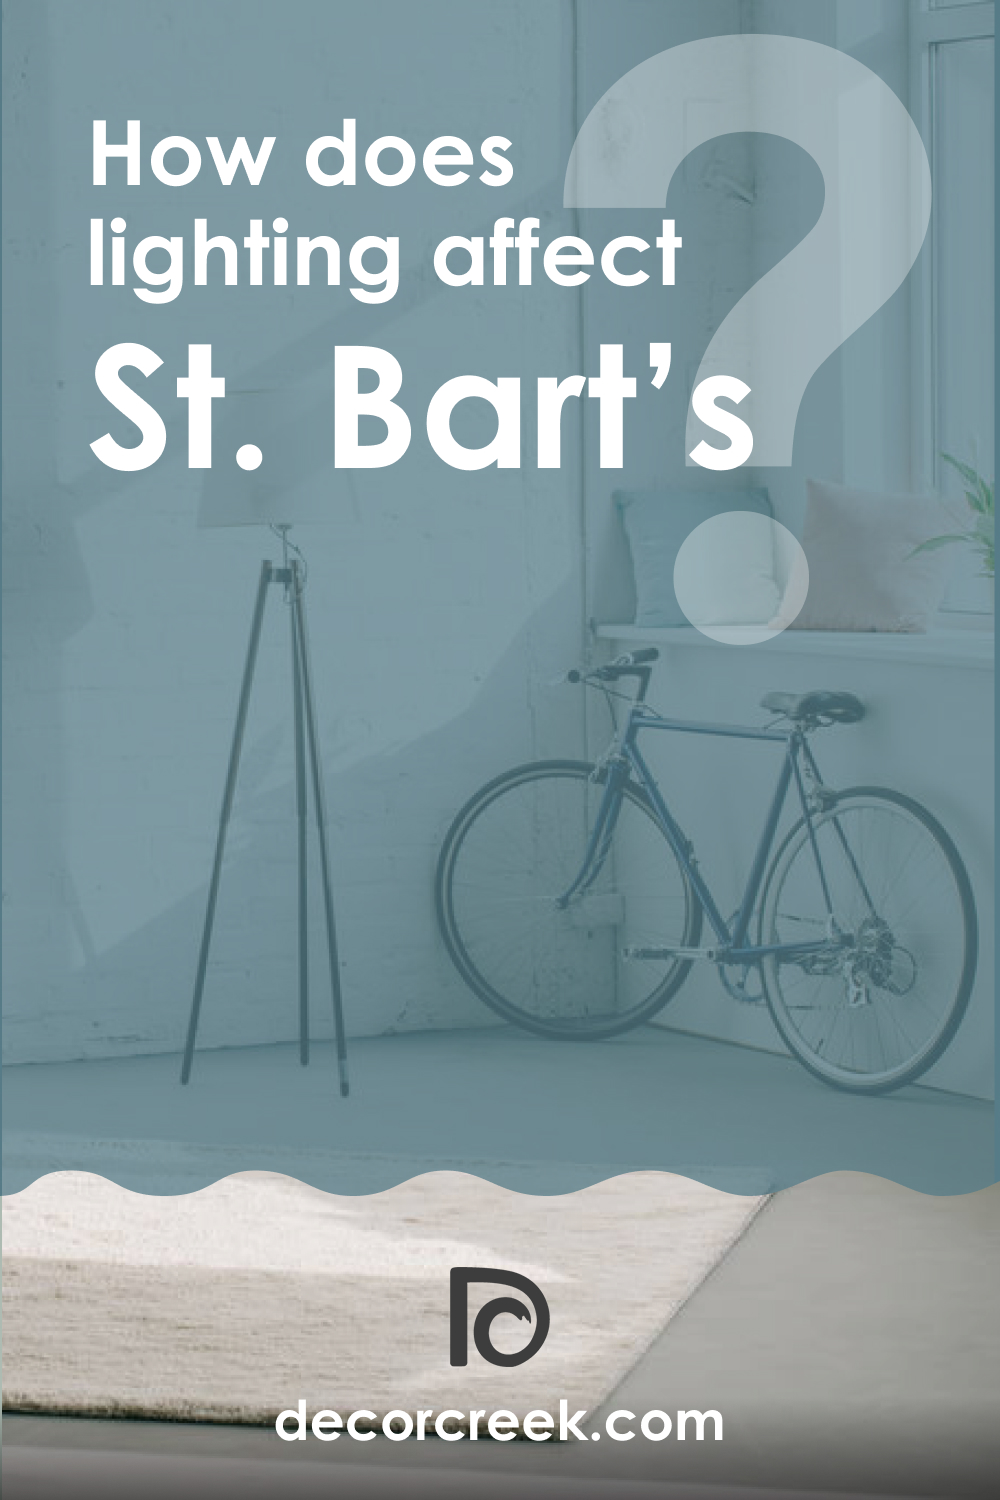 How Does Lighting Affect SW 7614 St. Bart’s?